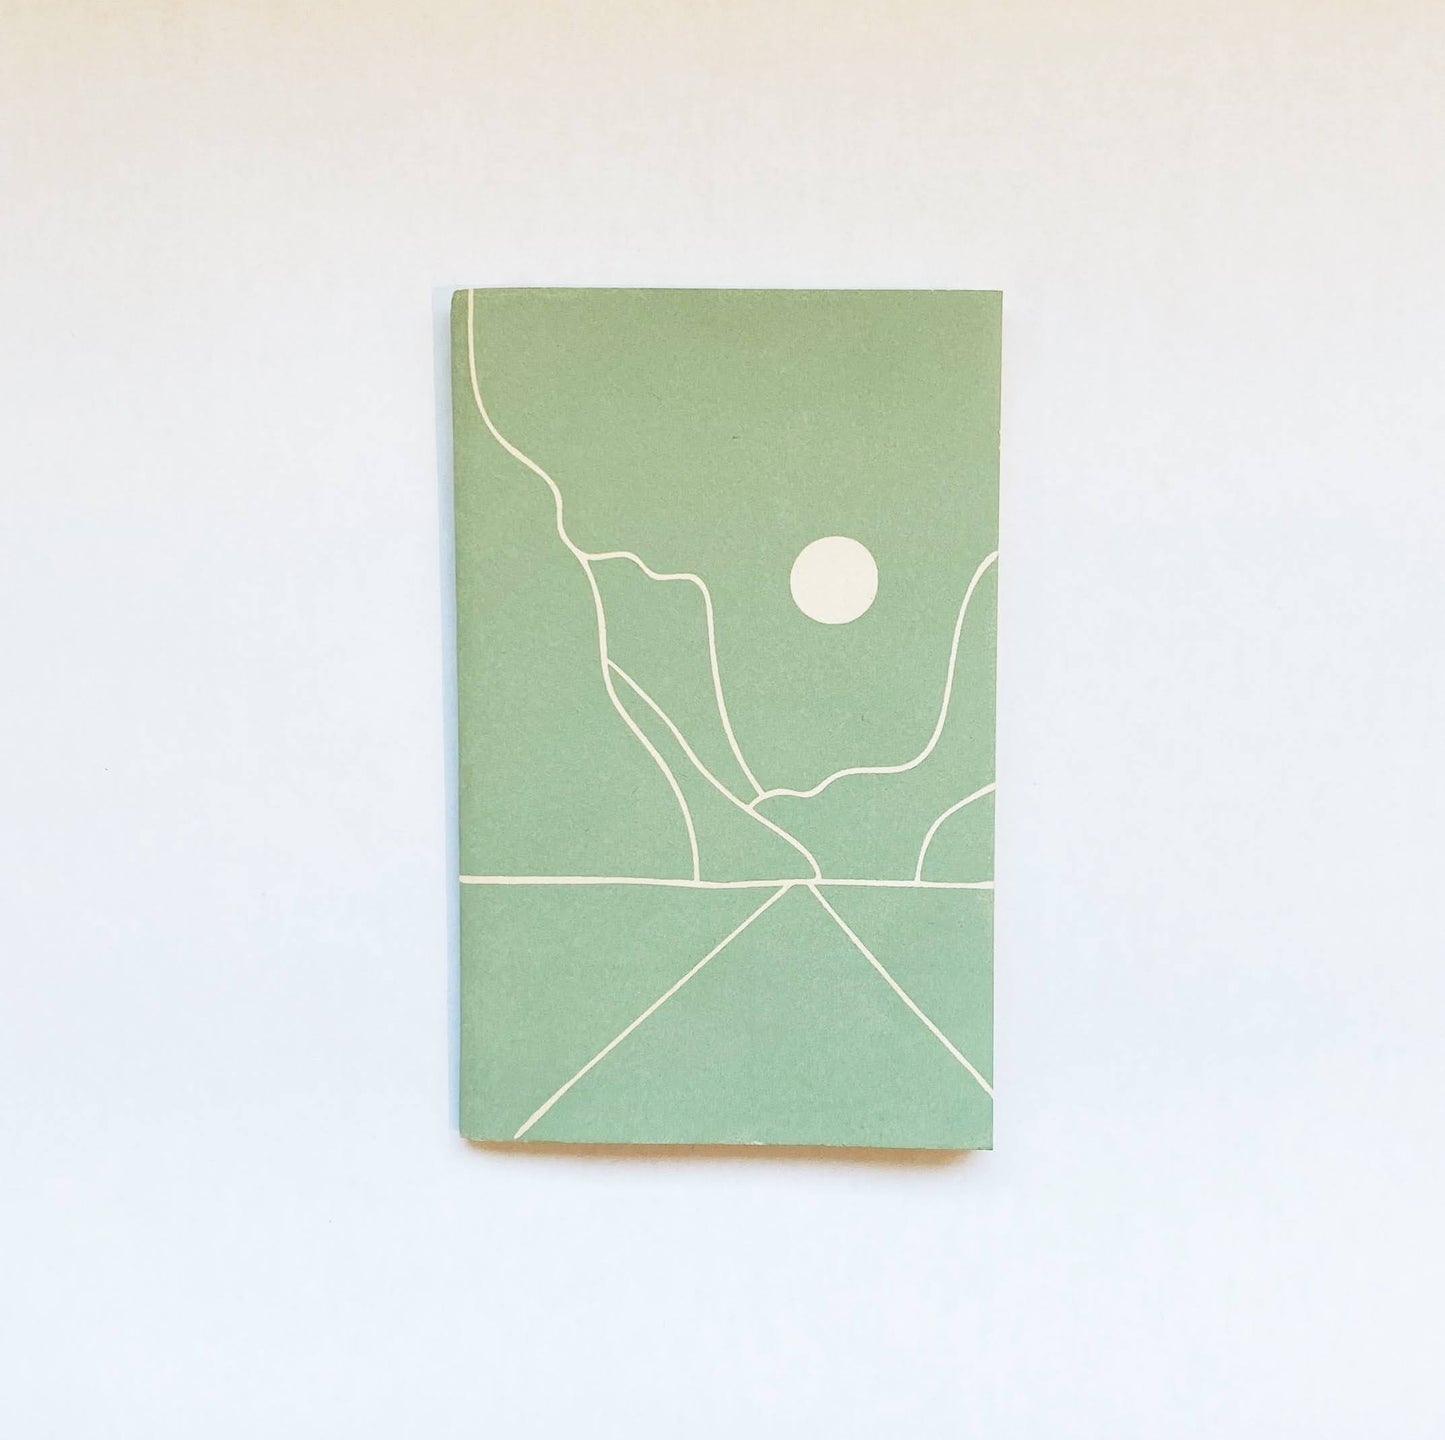 Recycled Paper Journal